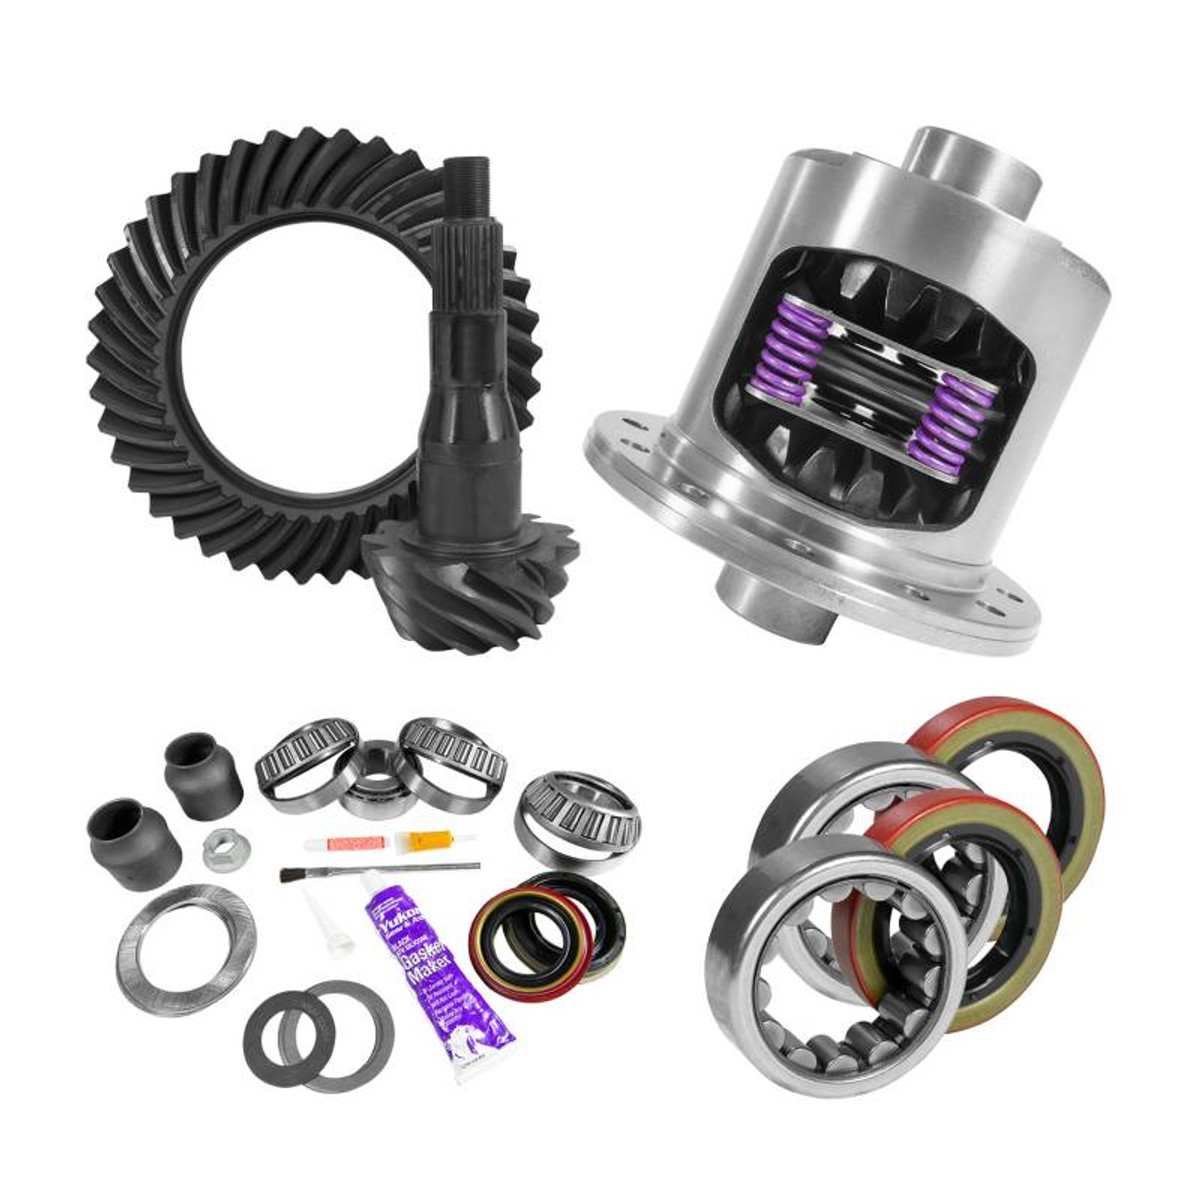 9.75 inch Ford 4.11 Rear Ring and Pinion Install Kit 34 Spline Positraction Axle Bearings YGK2093